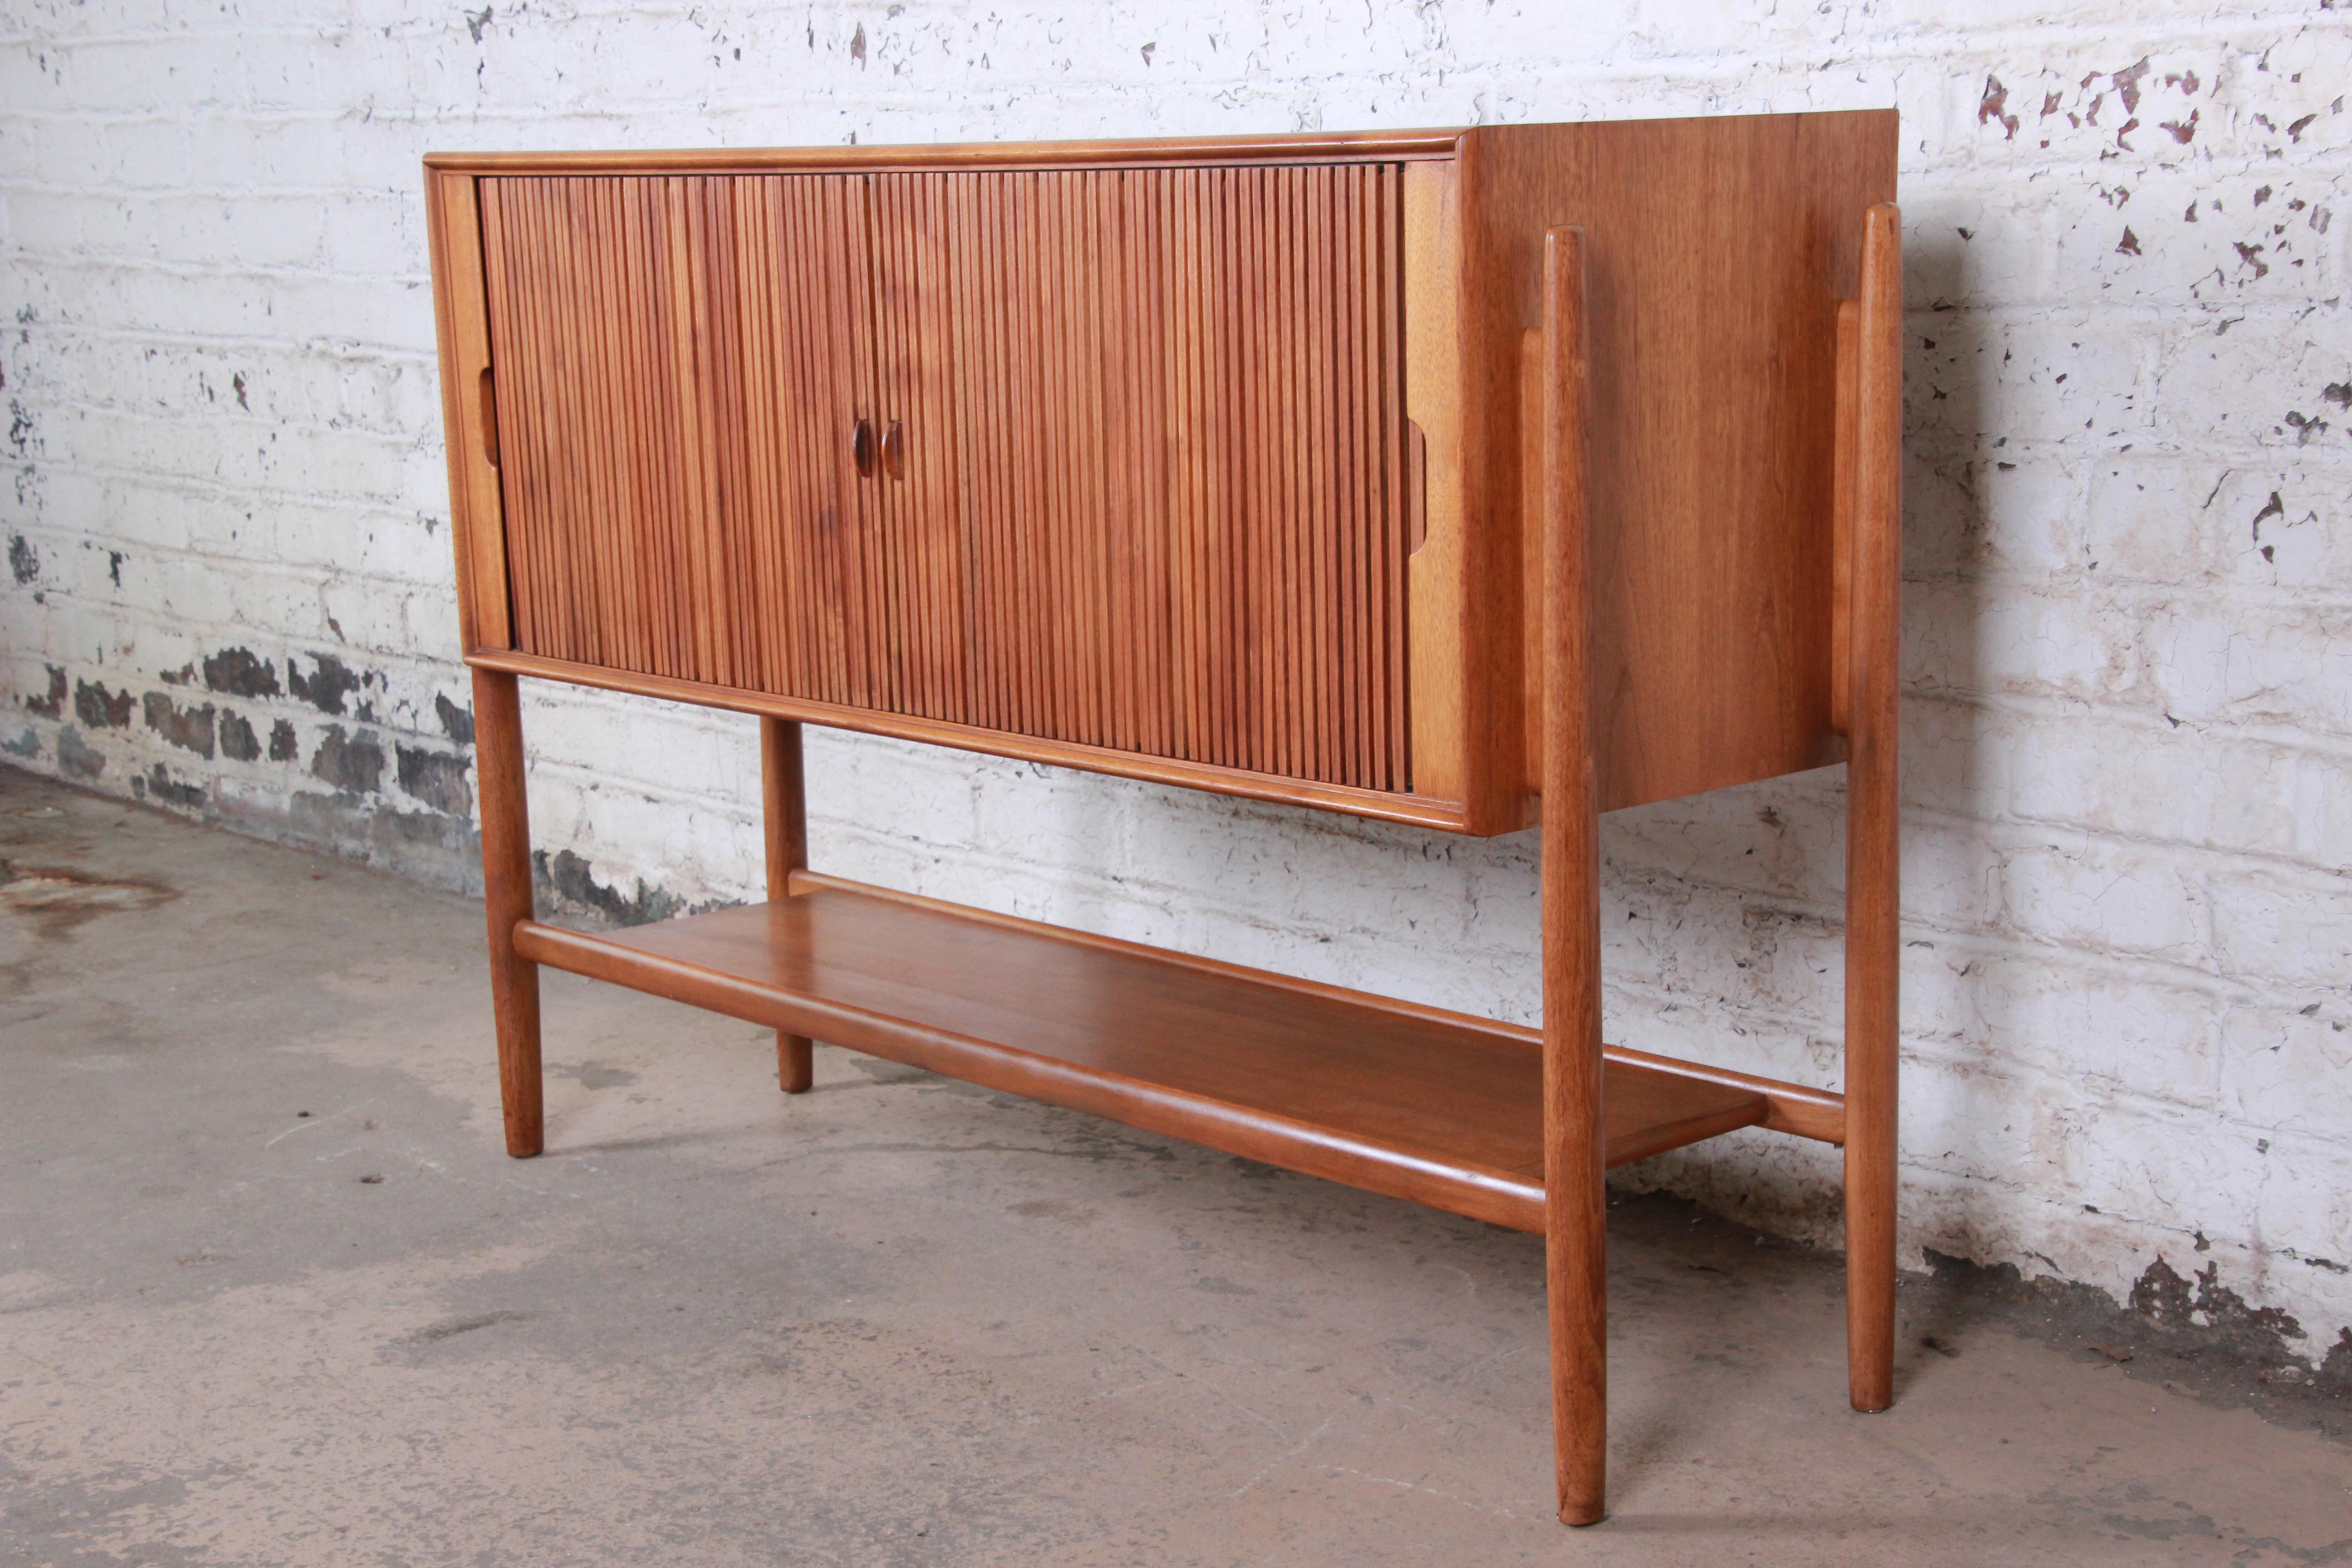 A rare and exceptional Mid-Century Modern walnut tambour door sideboard or credenza designed by Barney Flagg for the Parallel line by Drexel. The credenza features gorgeous walnut wood grain and sleek Danish-inspired design similar to pieces by Arne